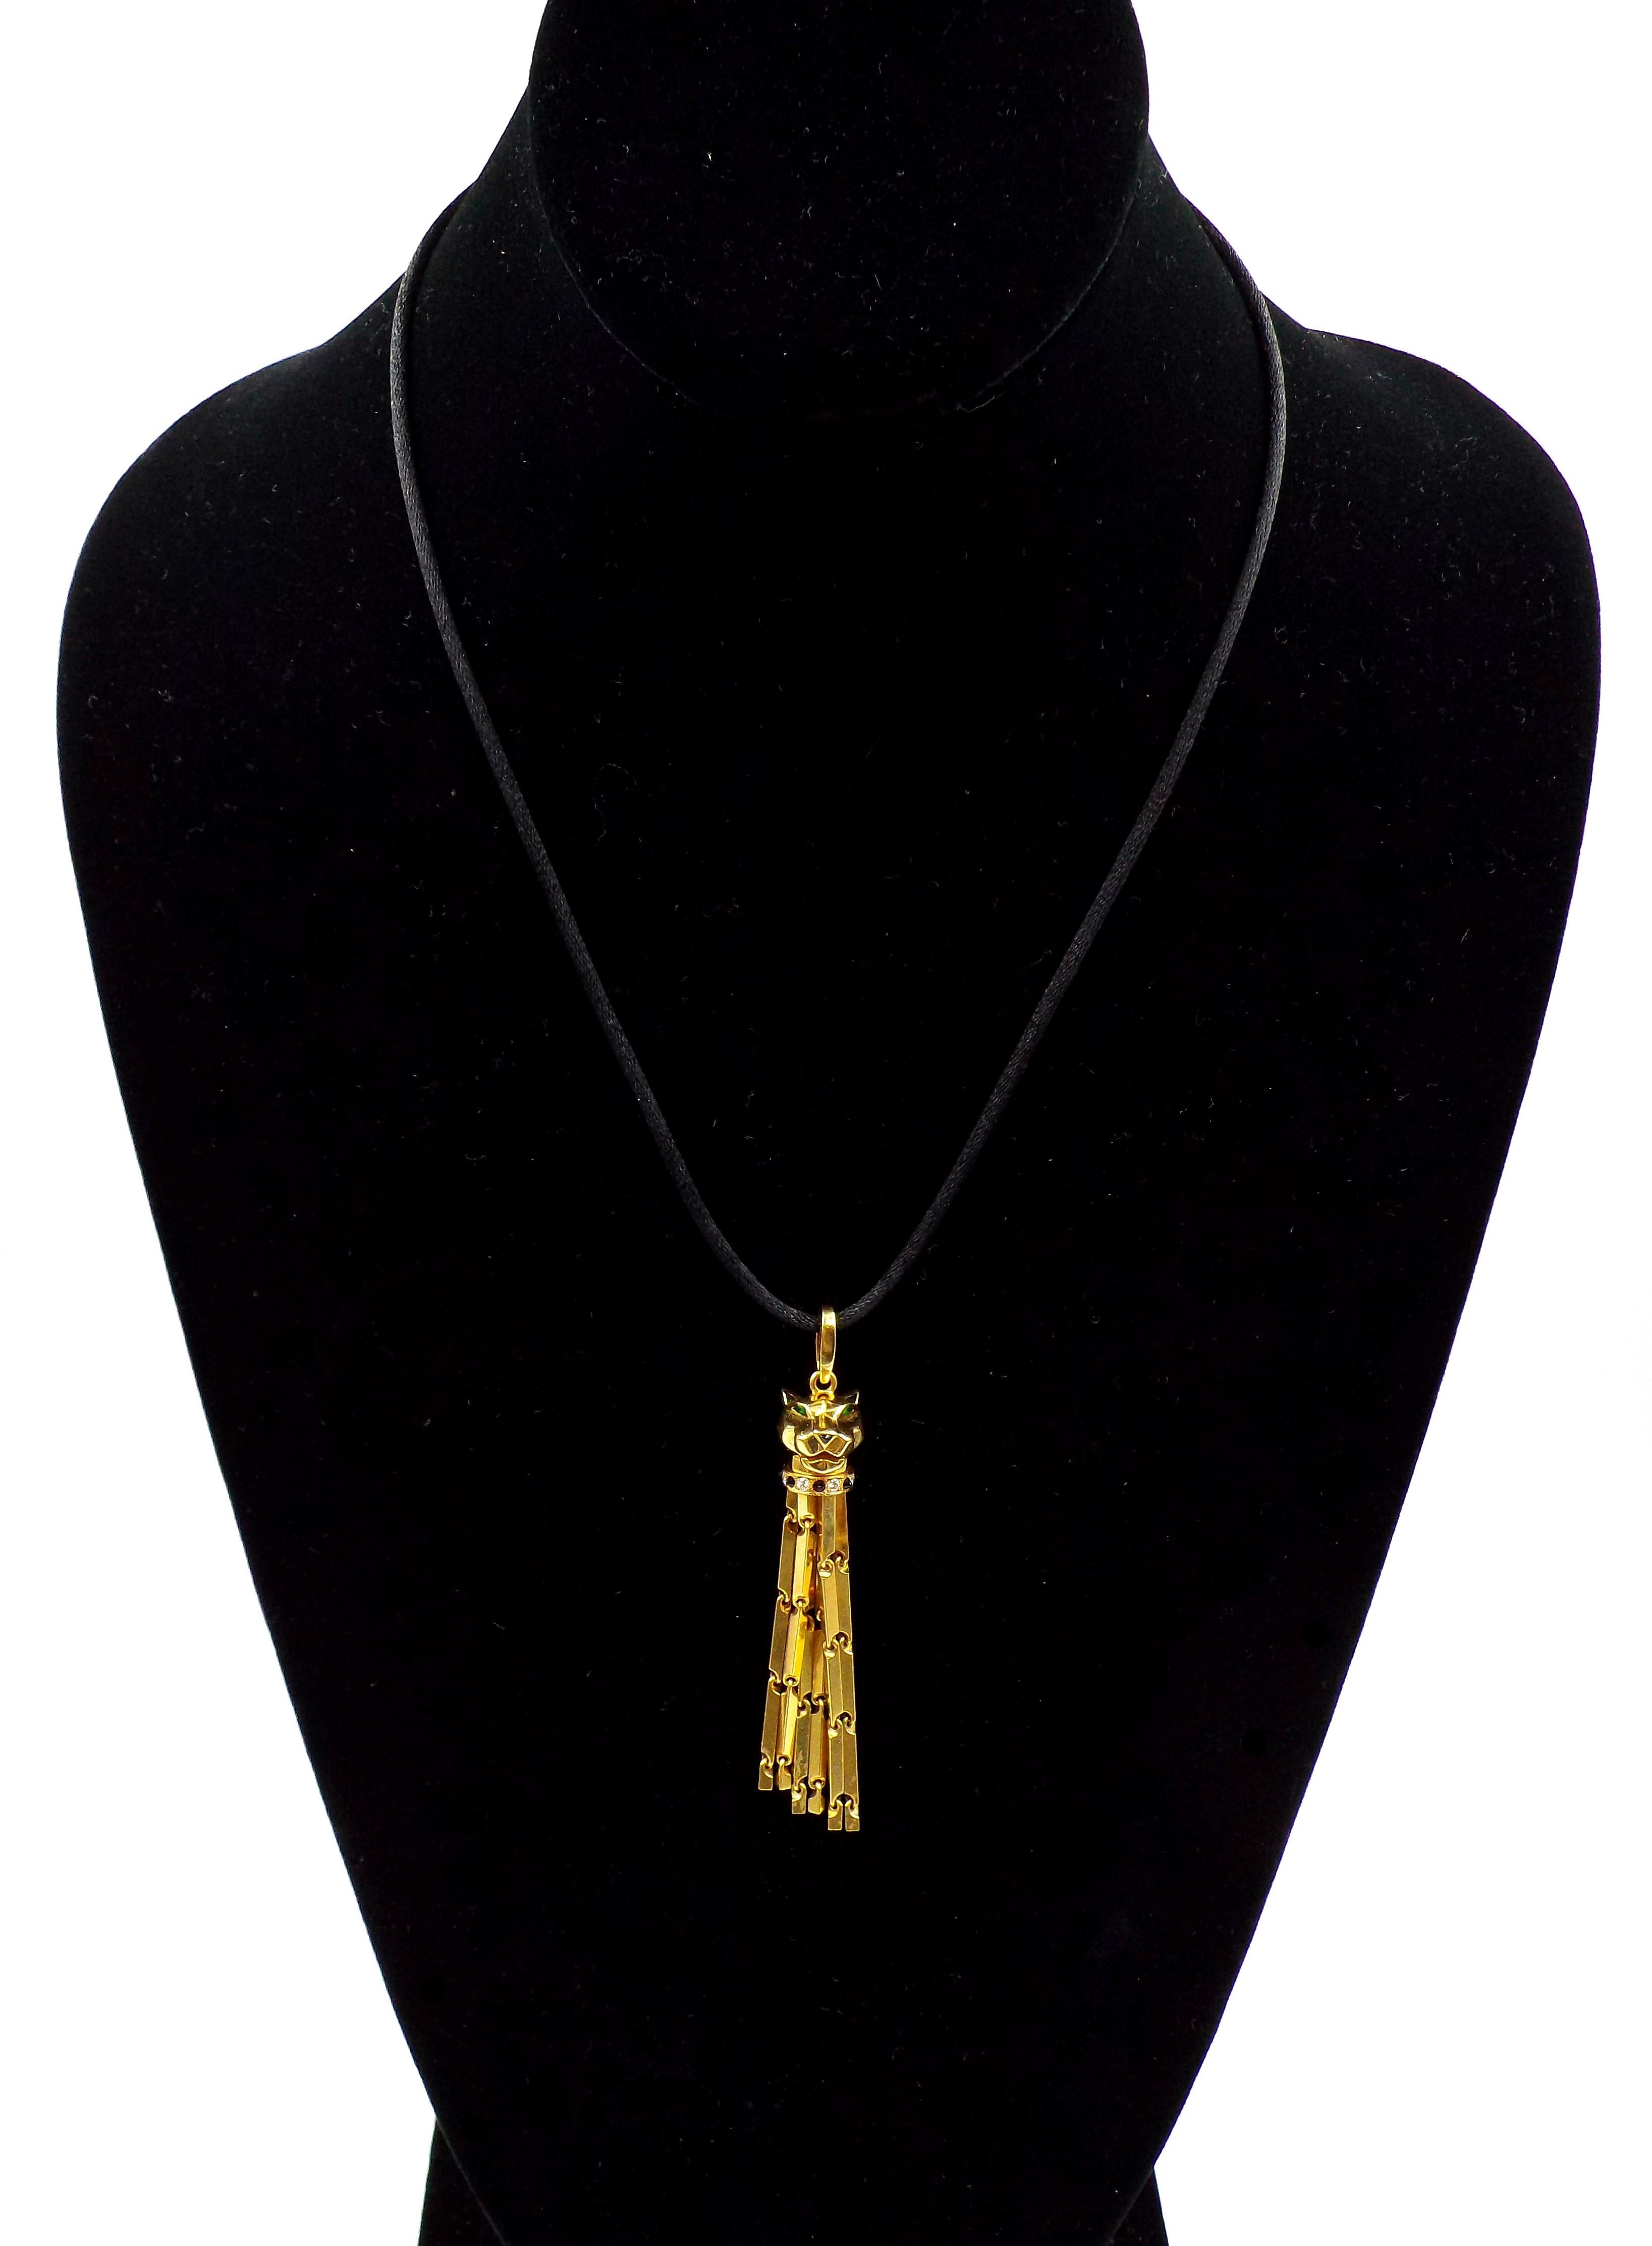 Cartier Panthere 18K Yellow Gold Pendant Necklace with a Black Cord For Sale 1